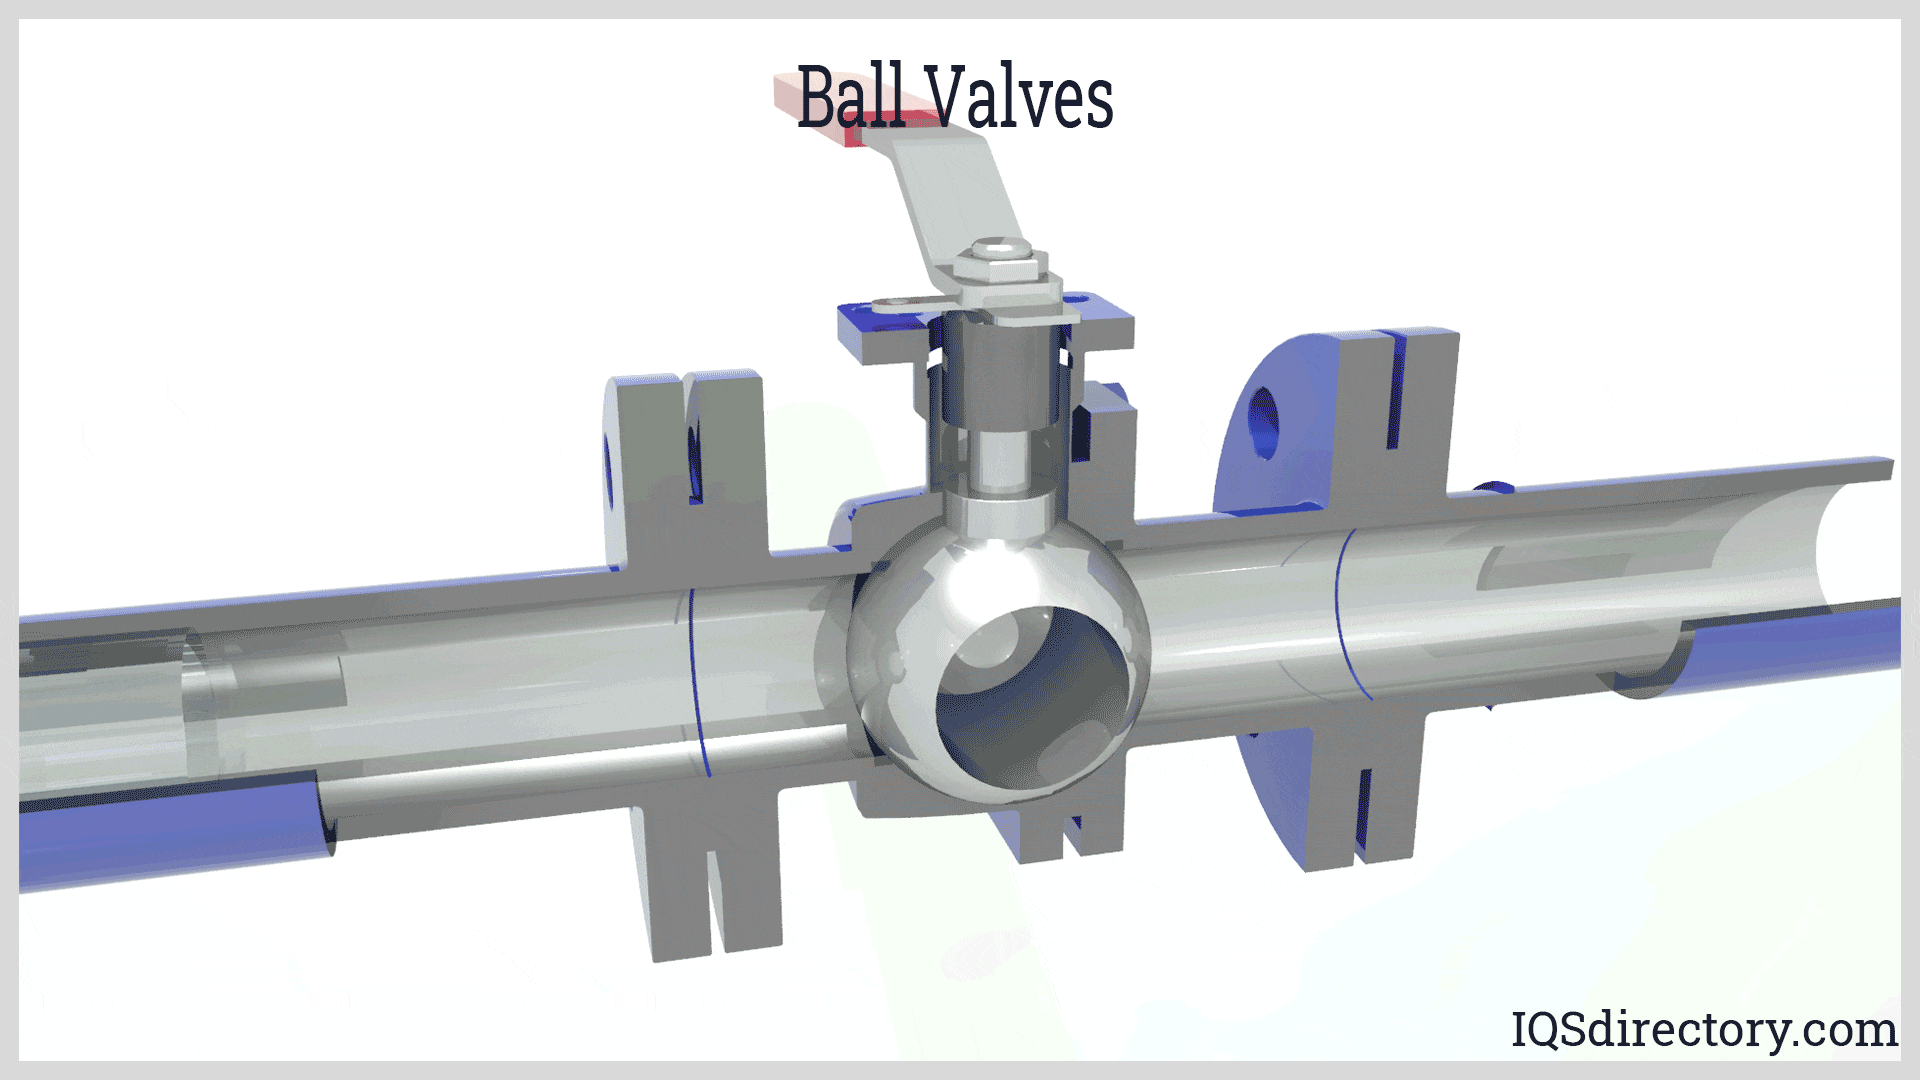 Ball Valve: What Is It? How Does It Work? Types Of, Uses